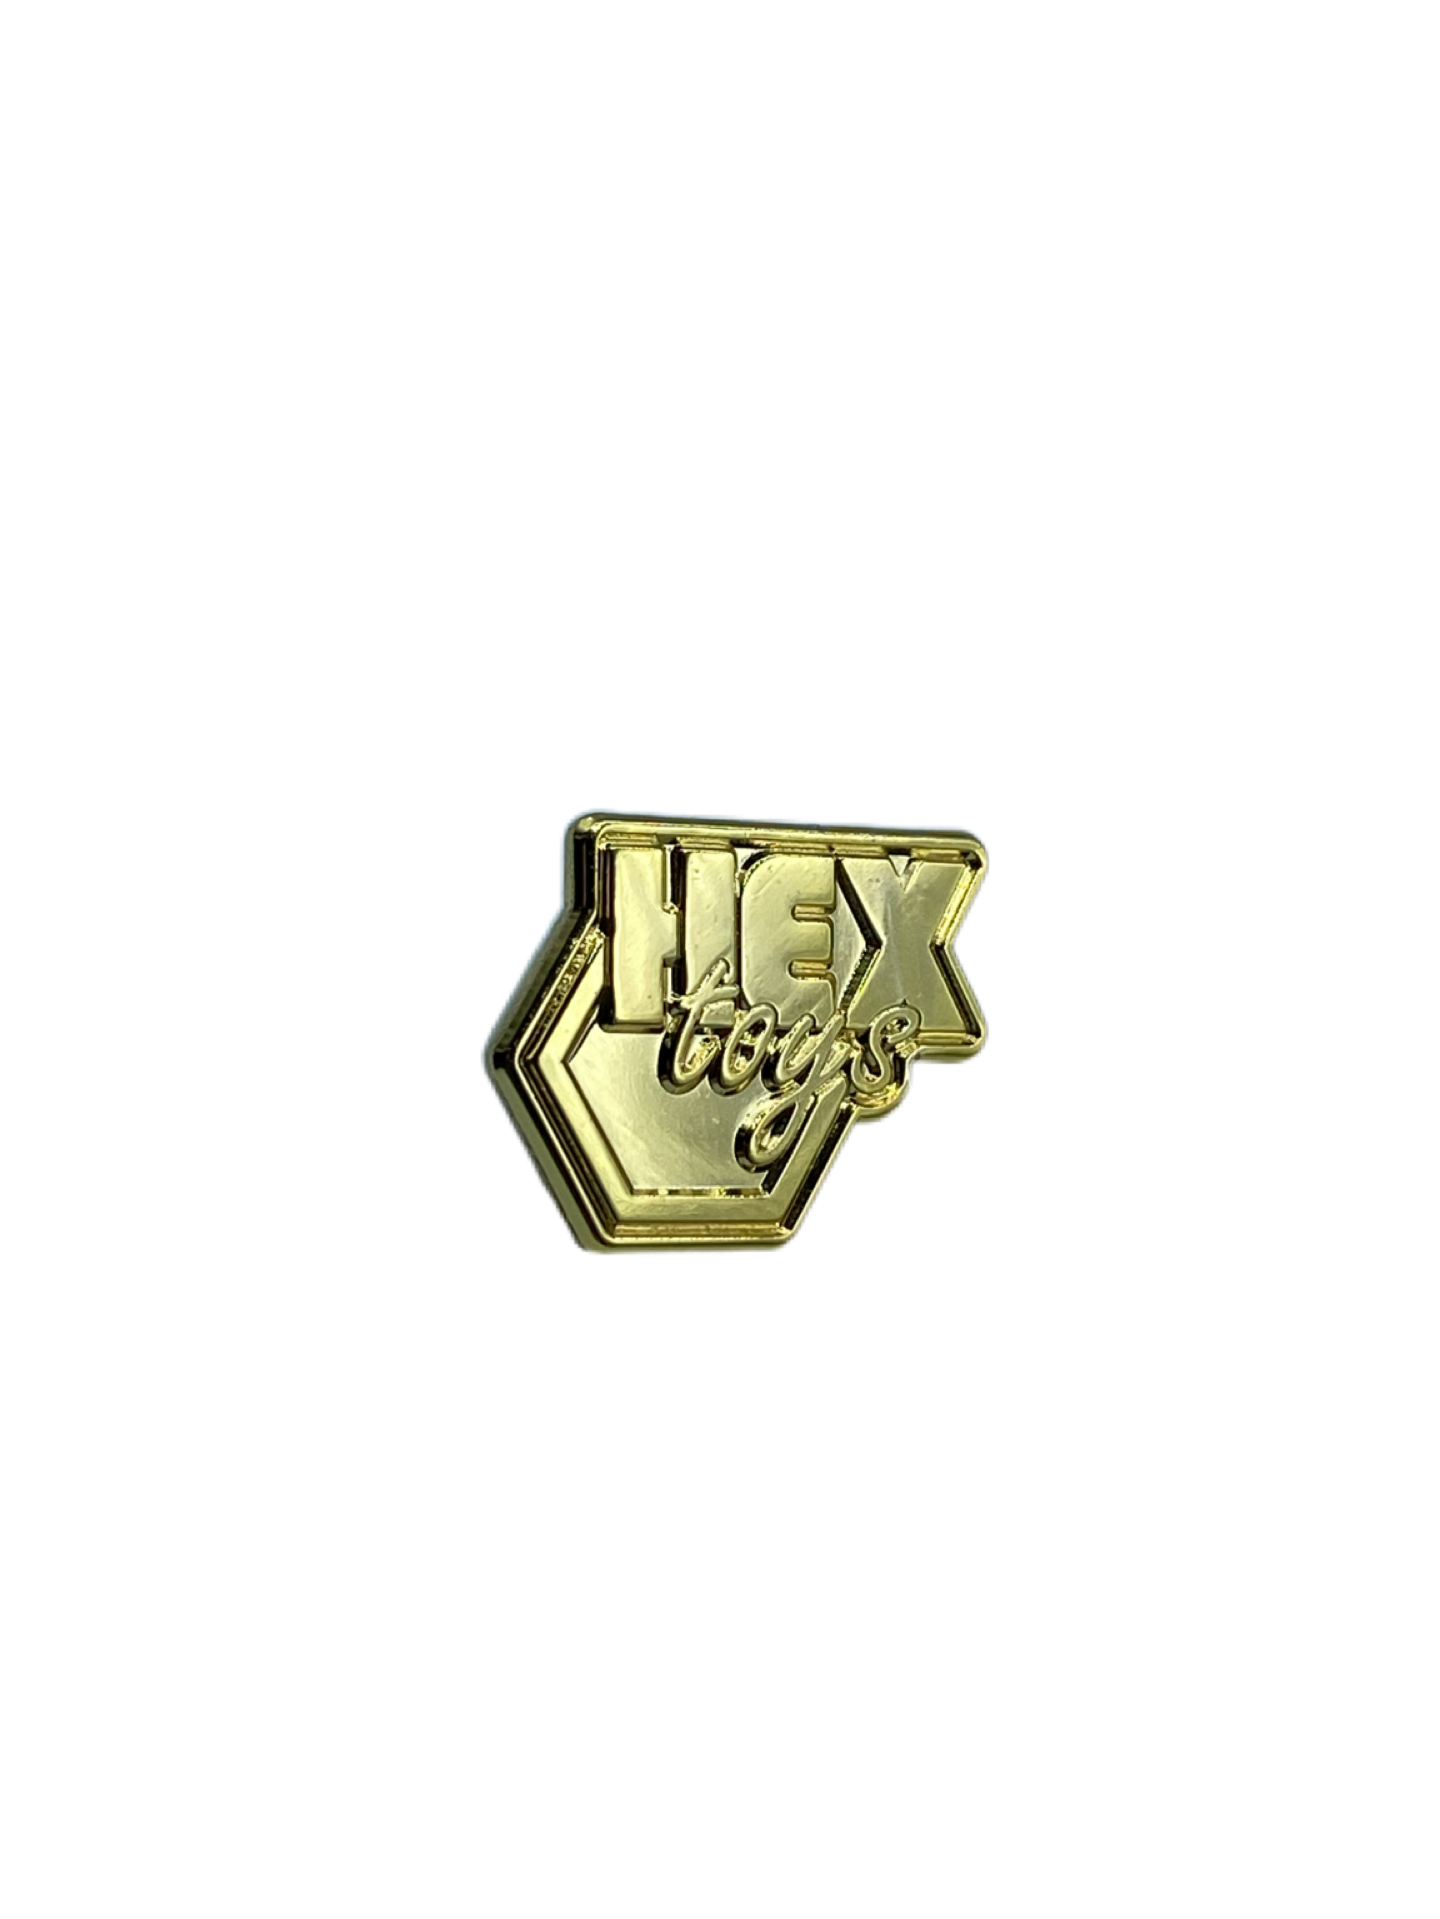 Hex Toys Pin